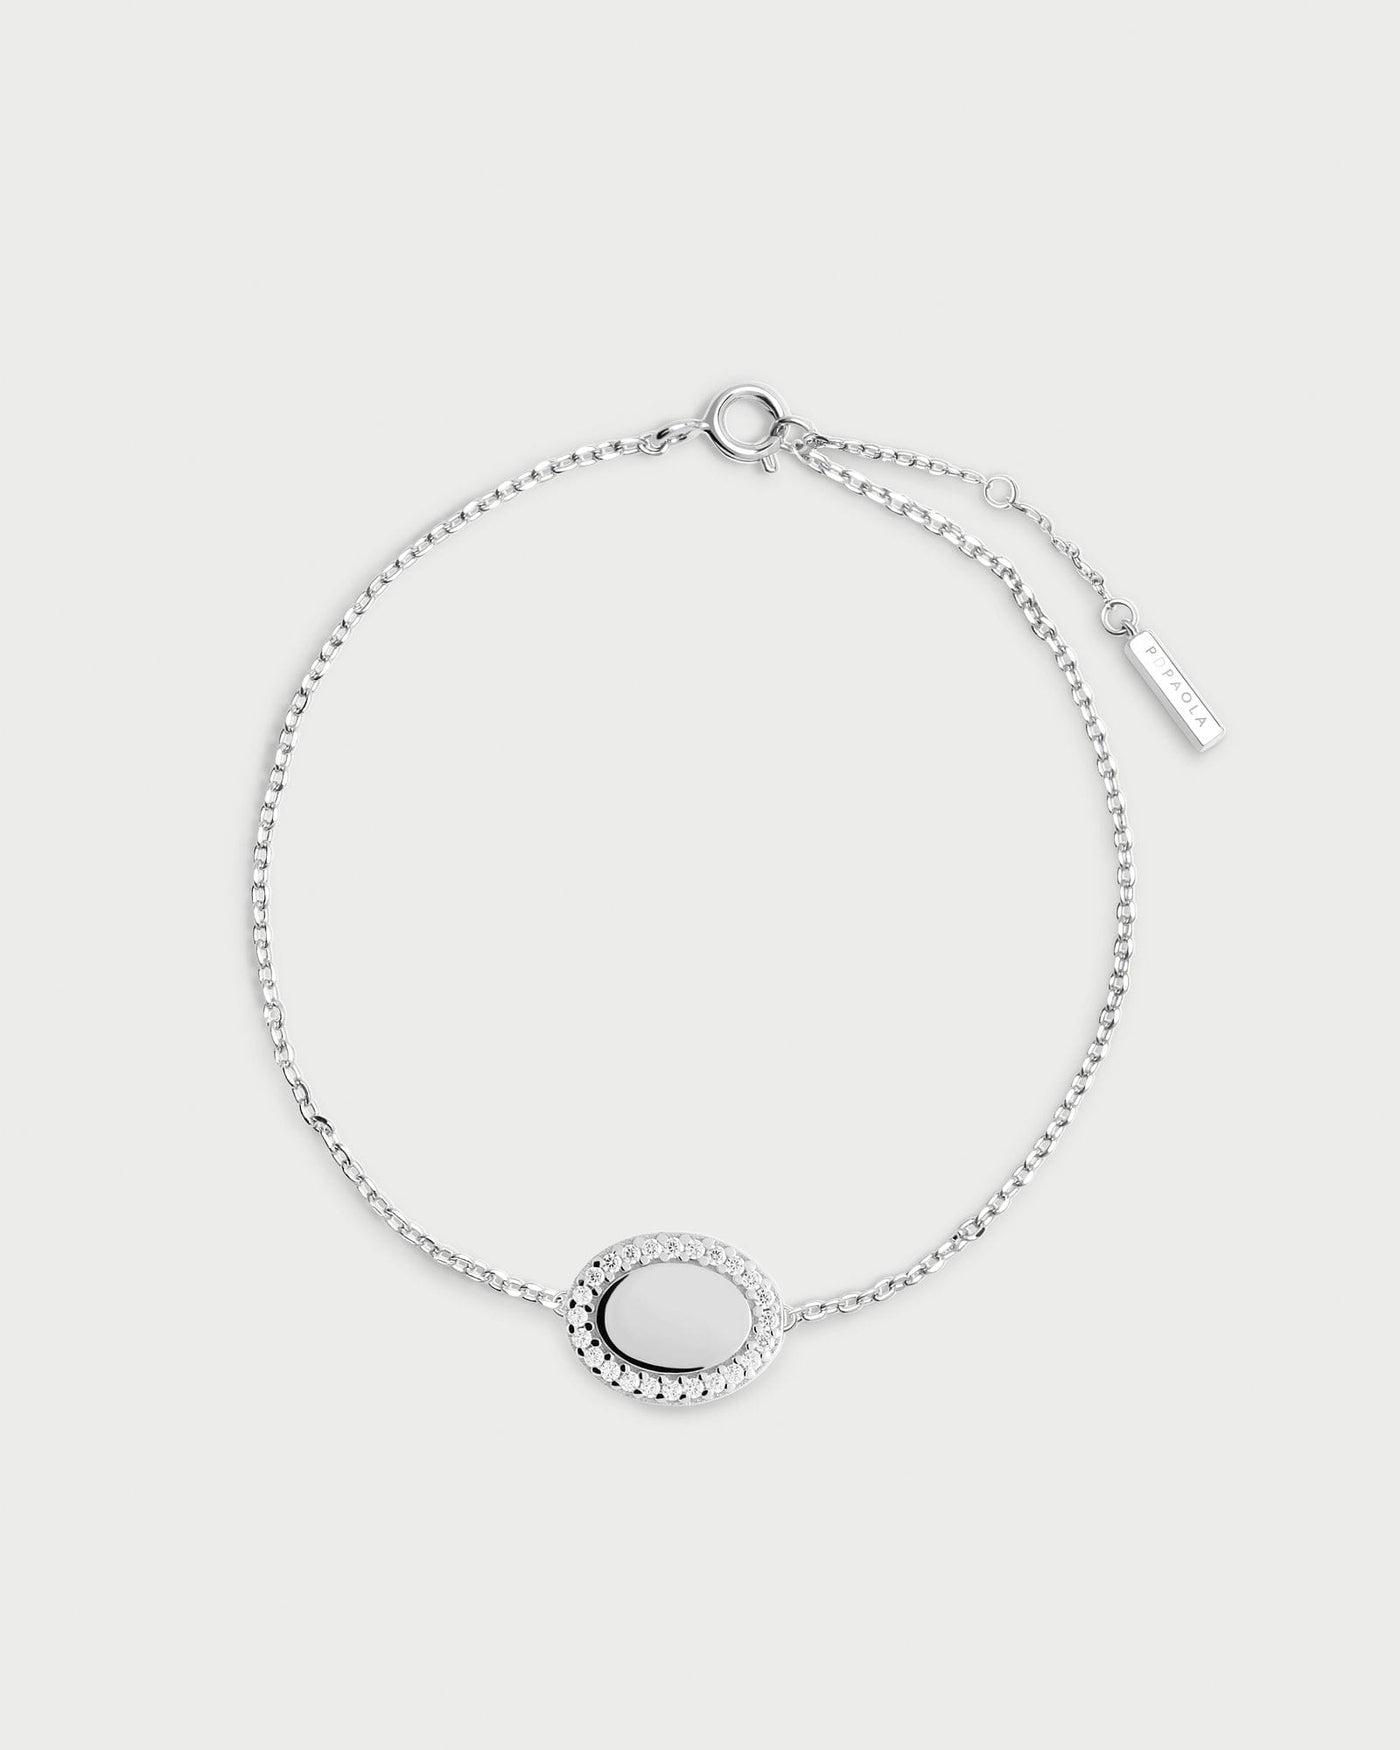 2024 Selection | Mademoiselle Silver Bracelet. 925 silver bracelet with engravable pendant circled by white zirconia. Get the latest arrival from PDPAOLA. Place your order safely and get this Best Seller. Free Shipping.